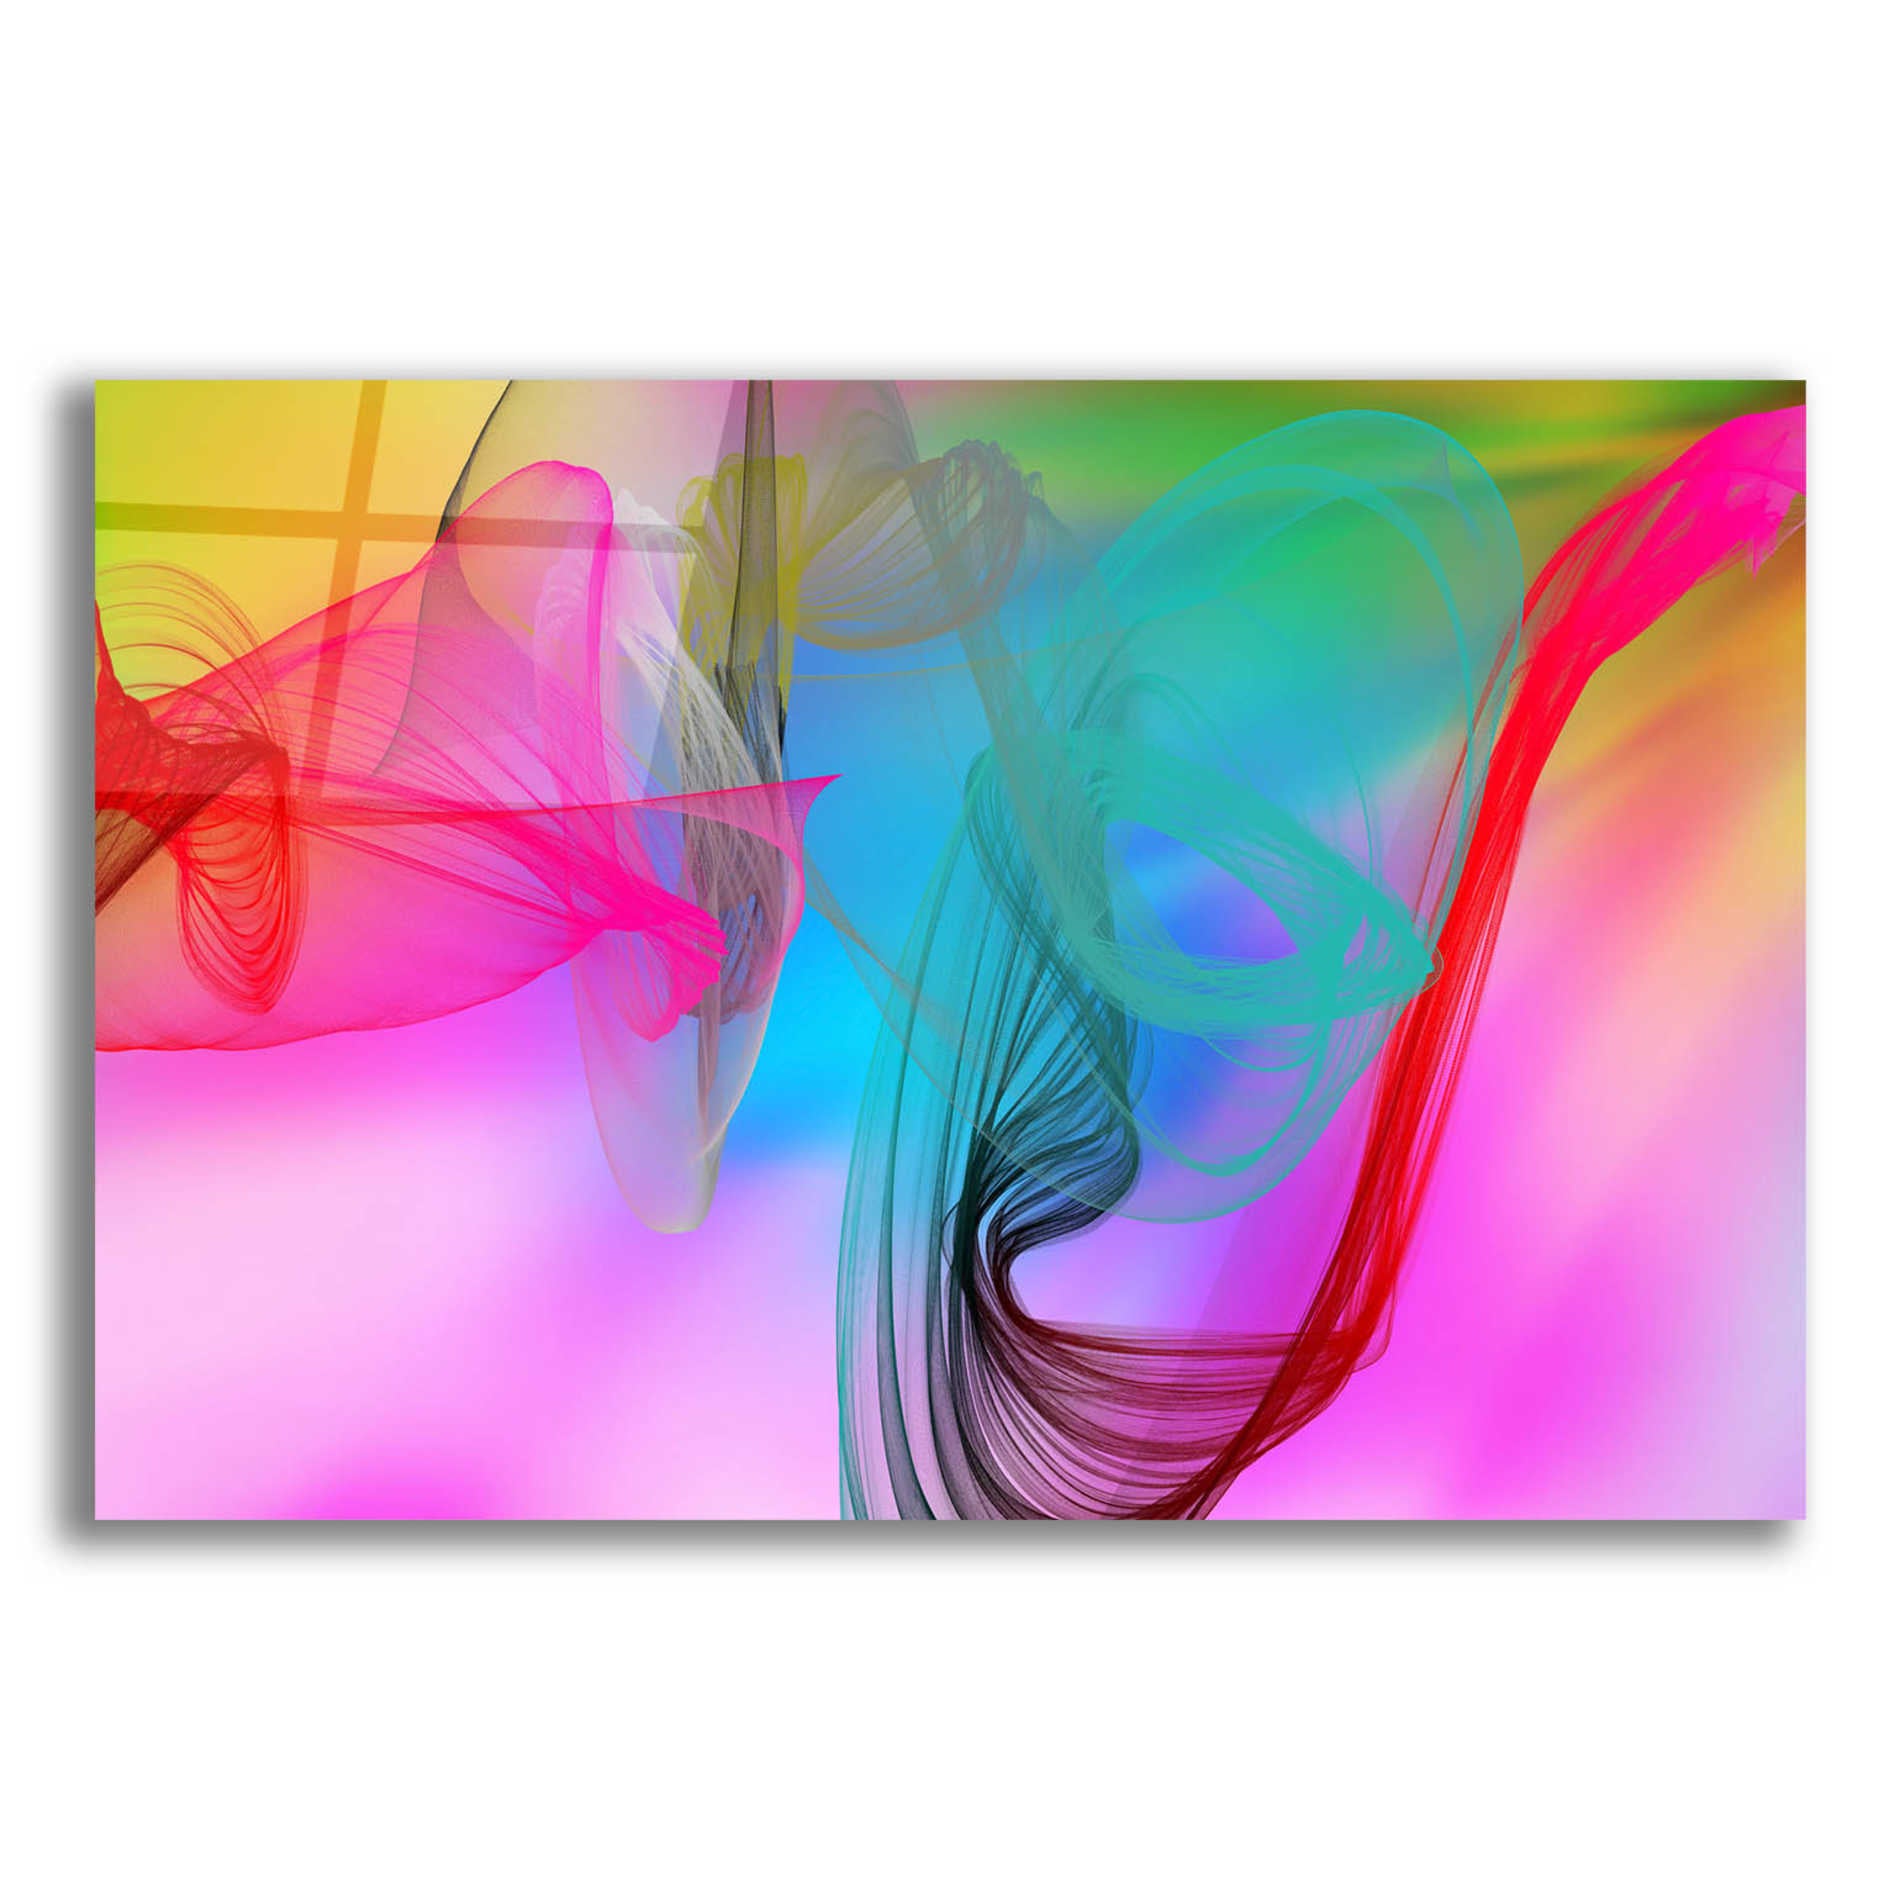 Epic Art 'Color In The Lines 8' by Irena Orlov Acrylic Glass Wall Art,24x16